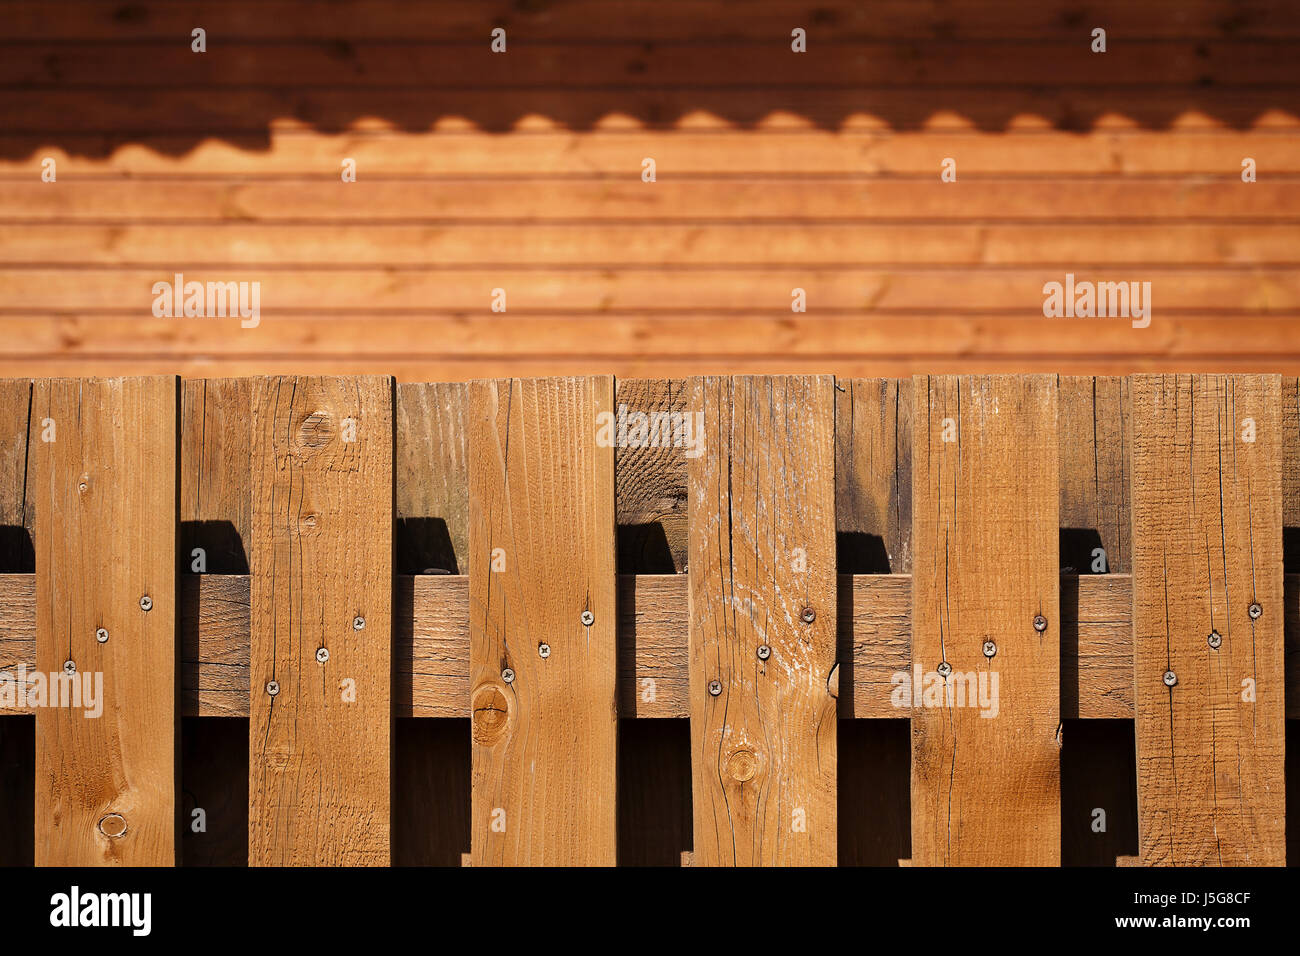 Wooden fence and wooden wall background Stock Photo